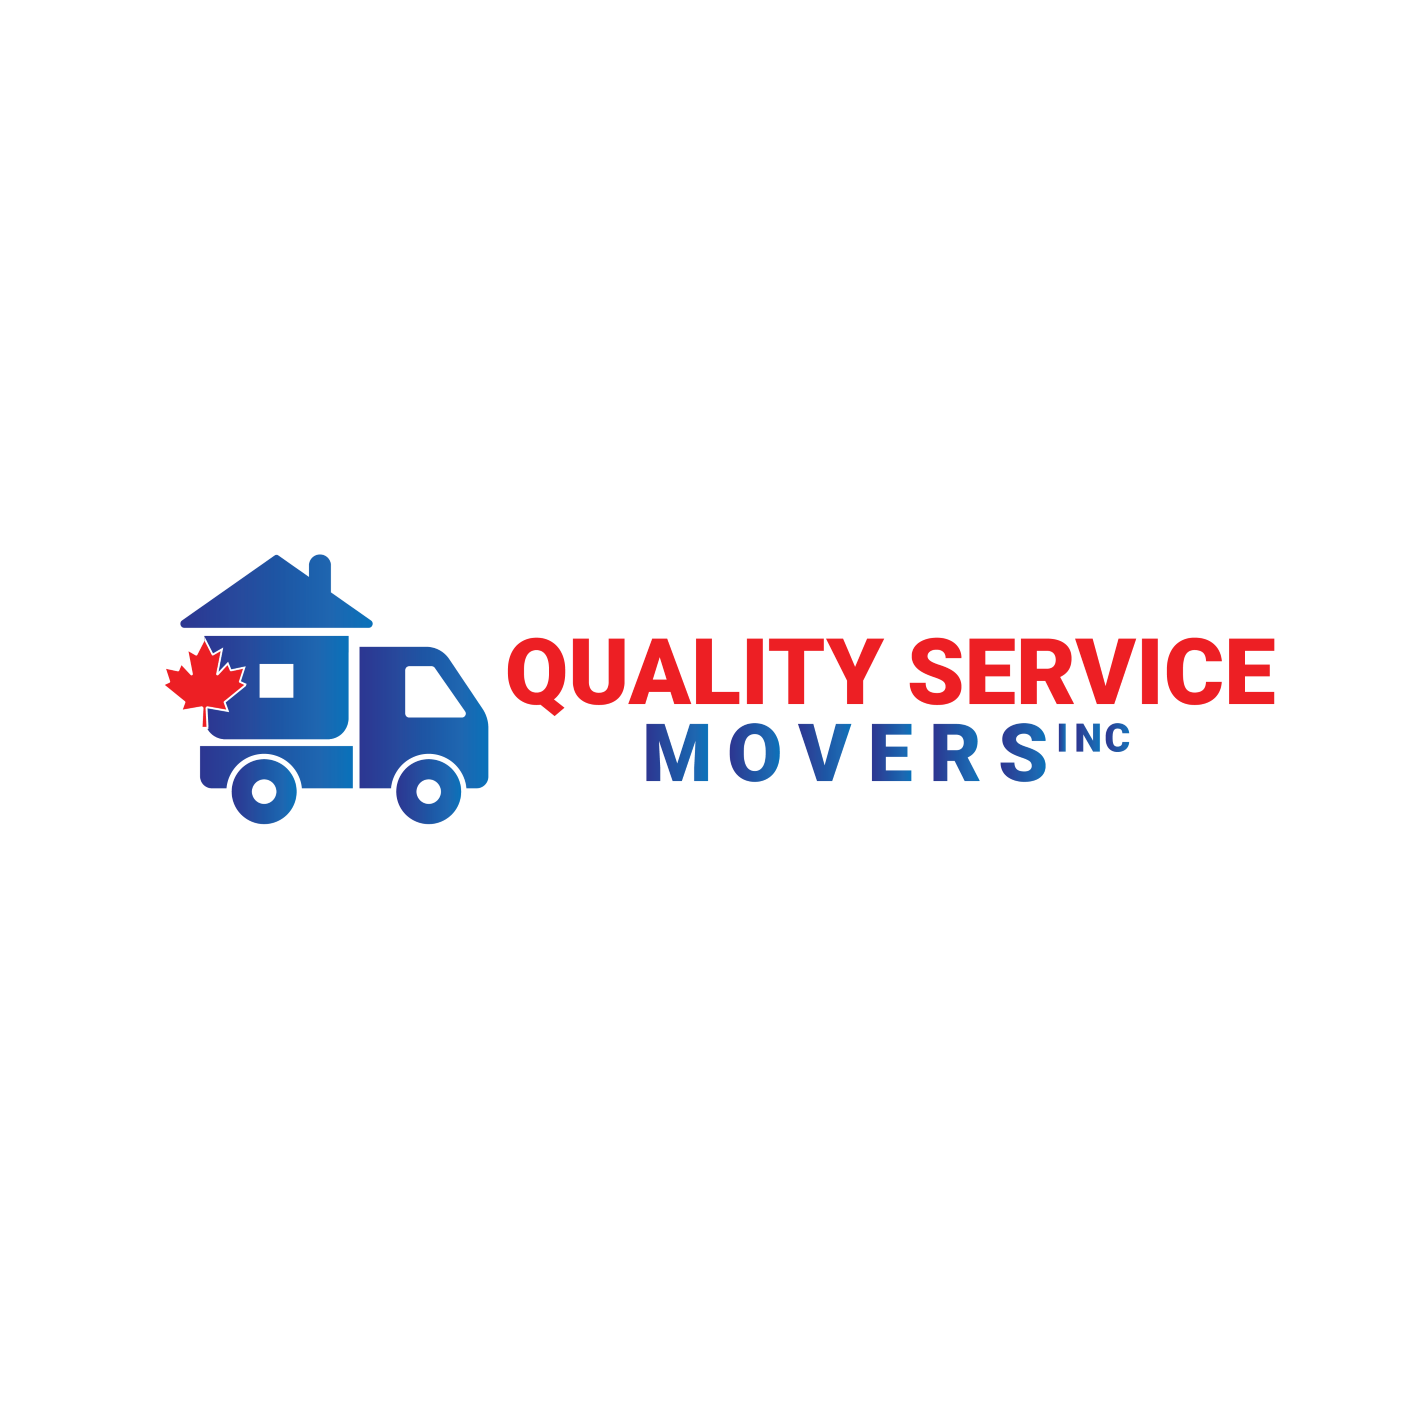 Quality Service Movers Inc.'s logo